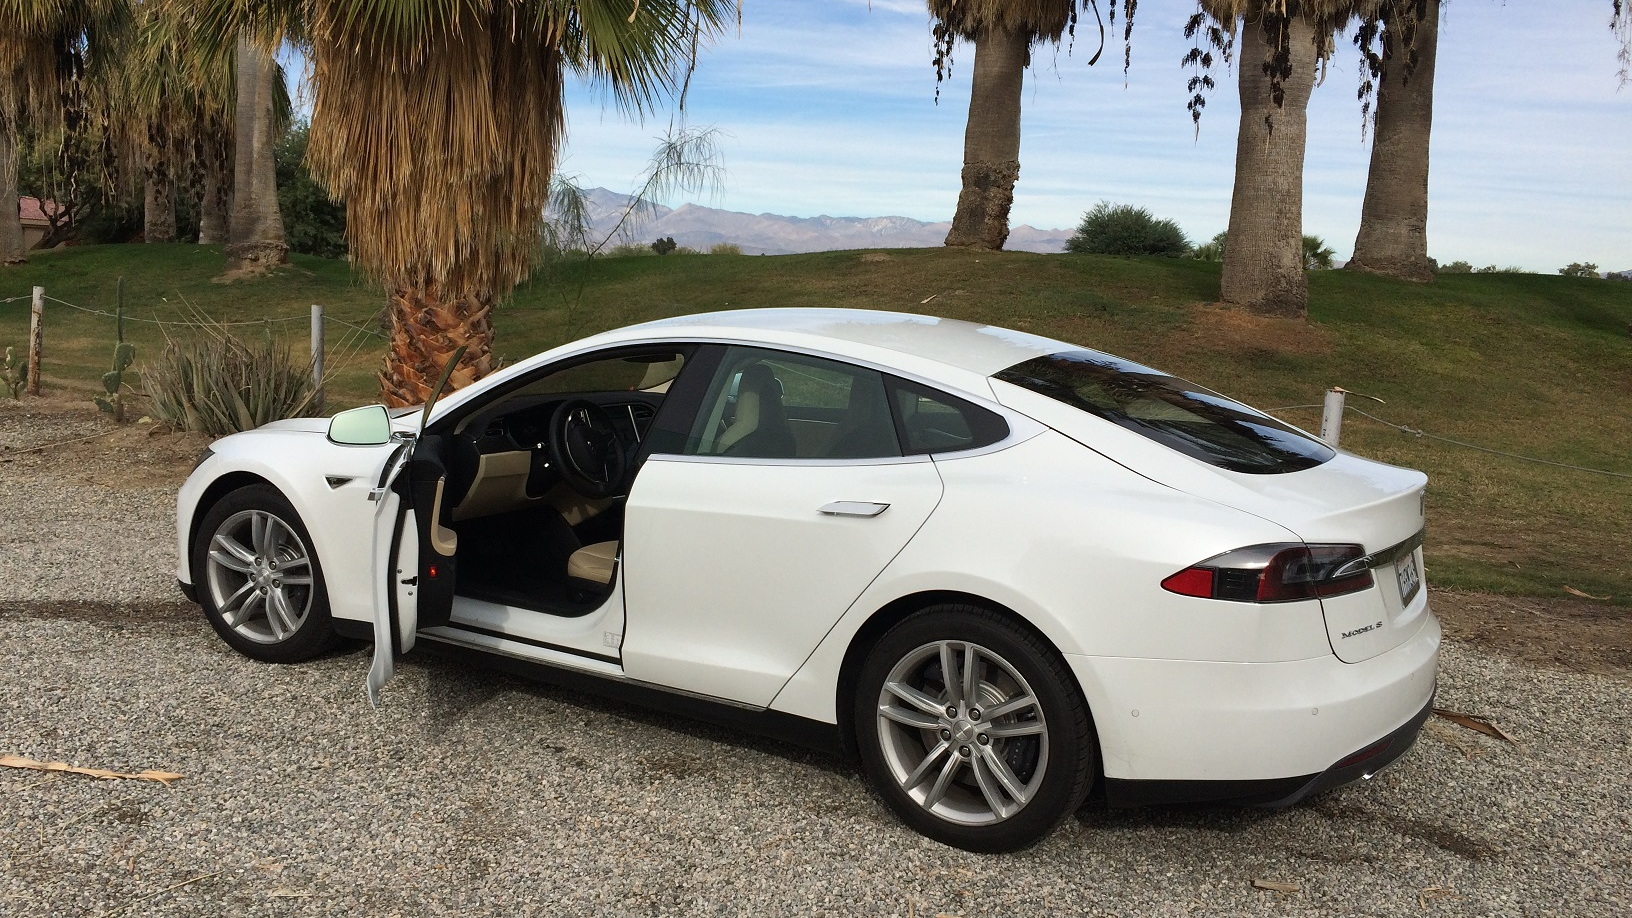 2014 Tesla Model S owned by Tom + Jeff of Palm Springs, California